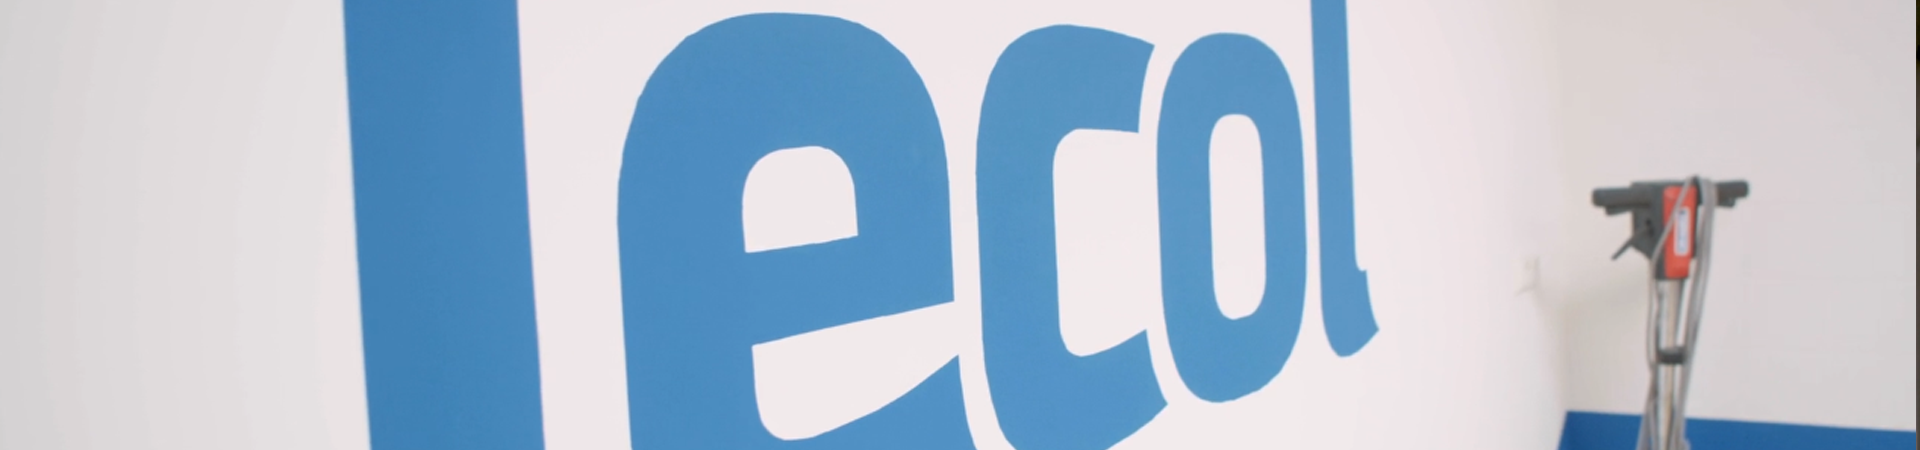 lecol banner.png